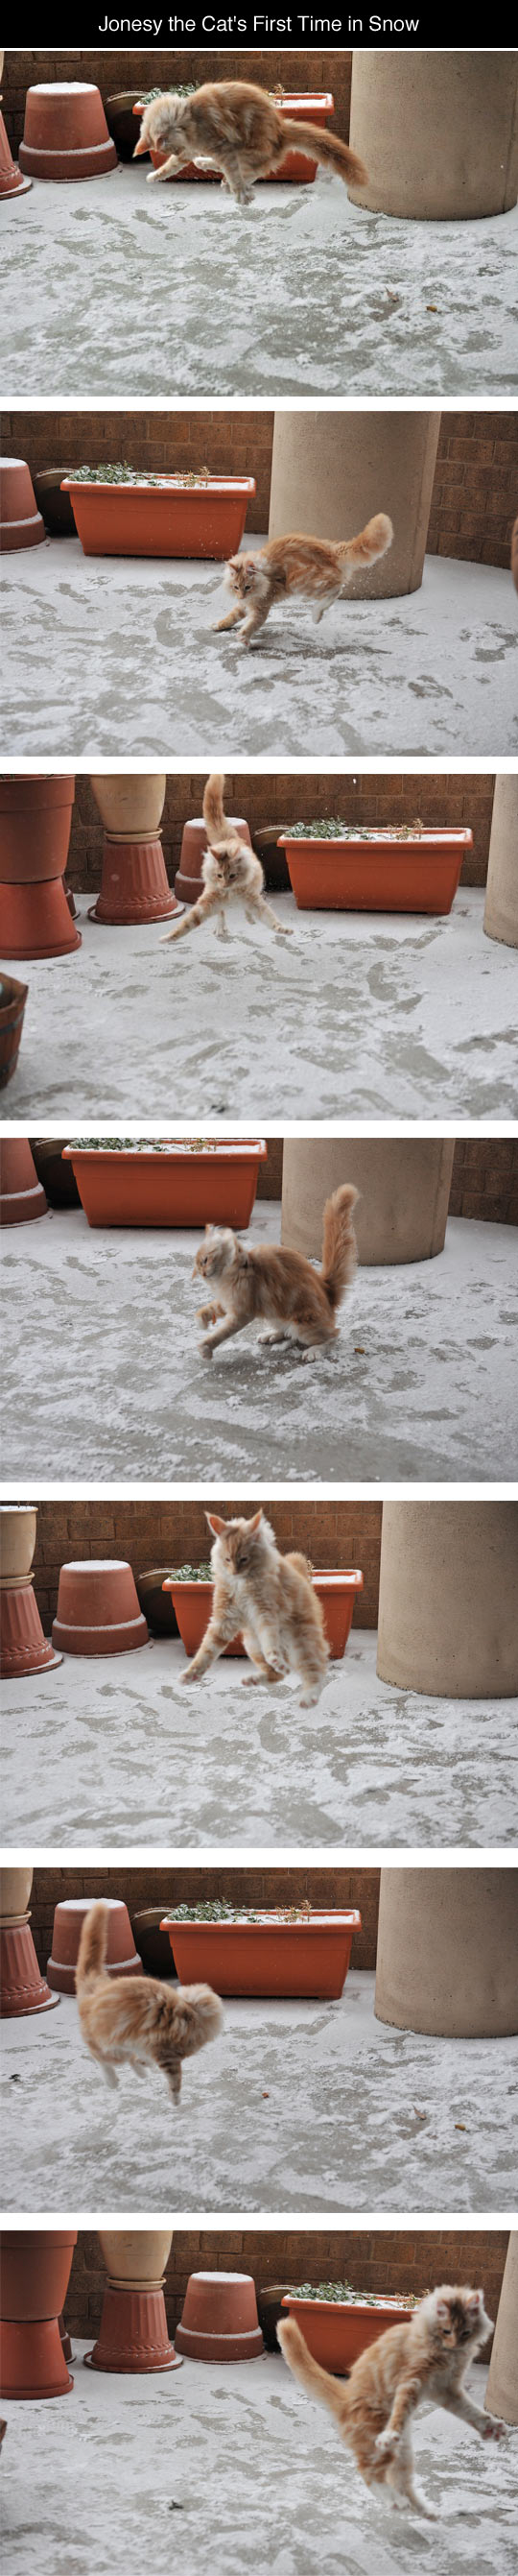 Cat Discovers Snow